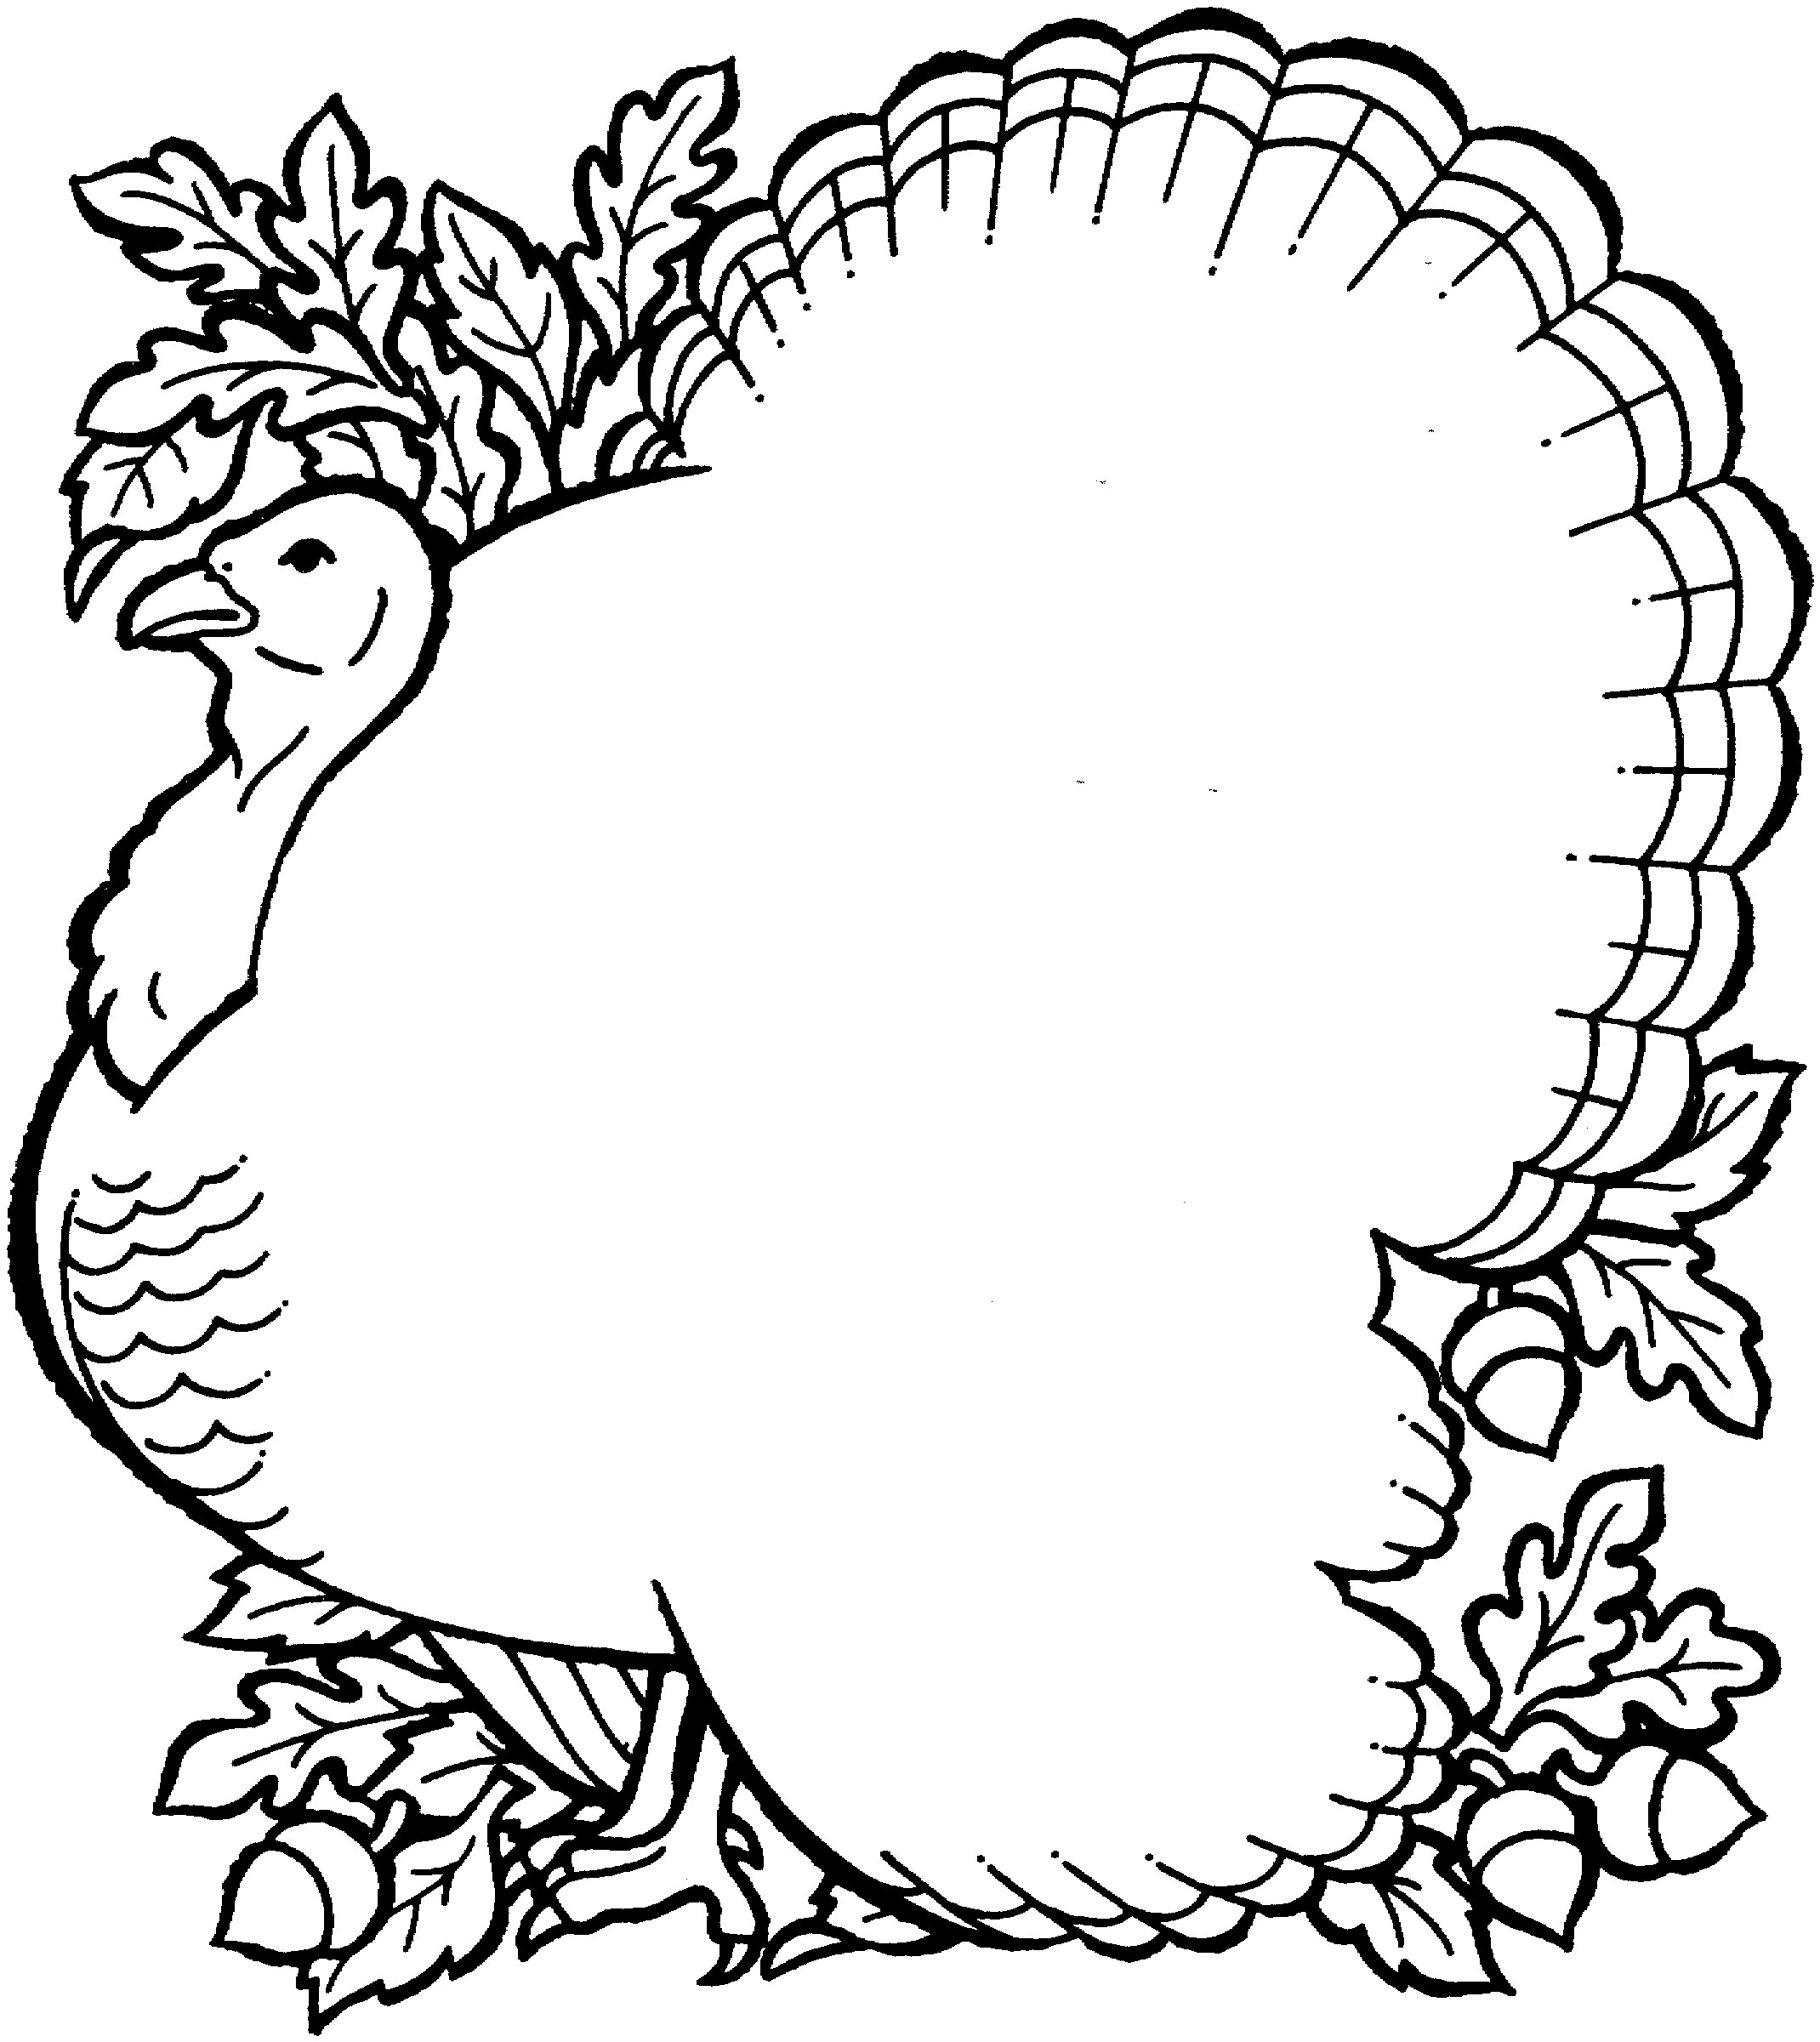 Thanksgiving Turkey Printable
 Free Turkey Coloring Pages